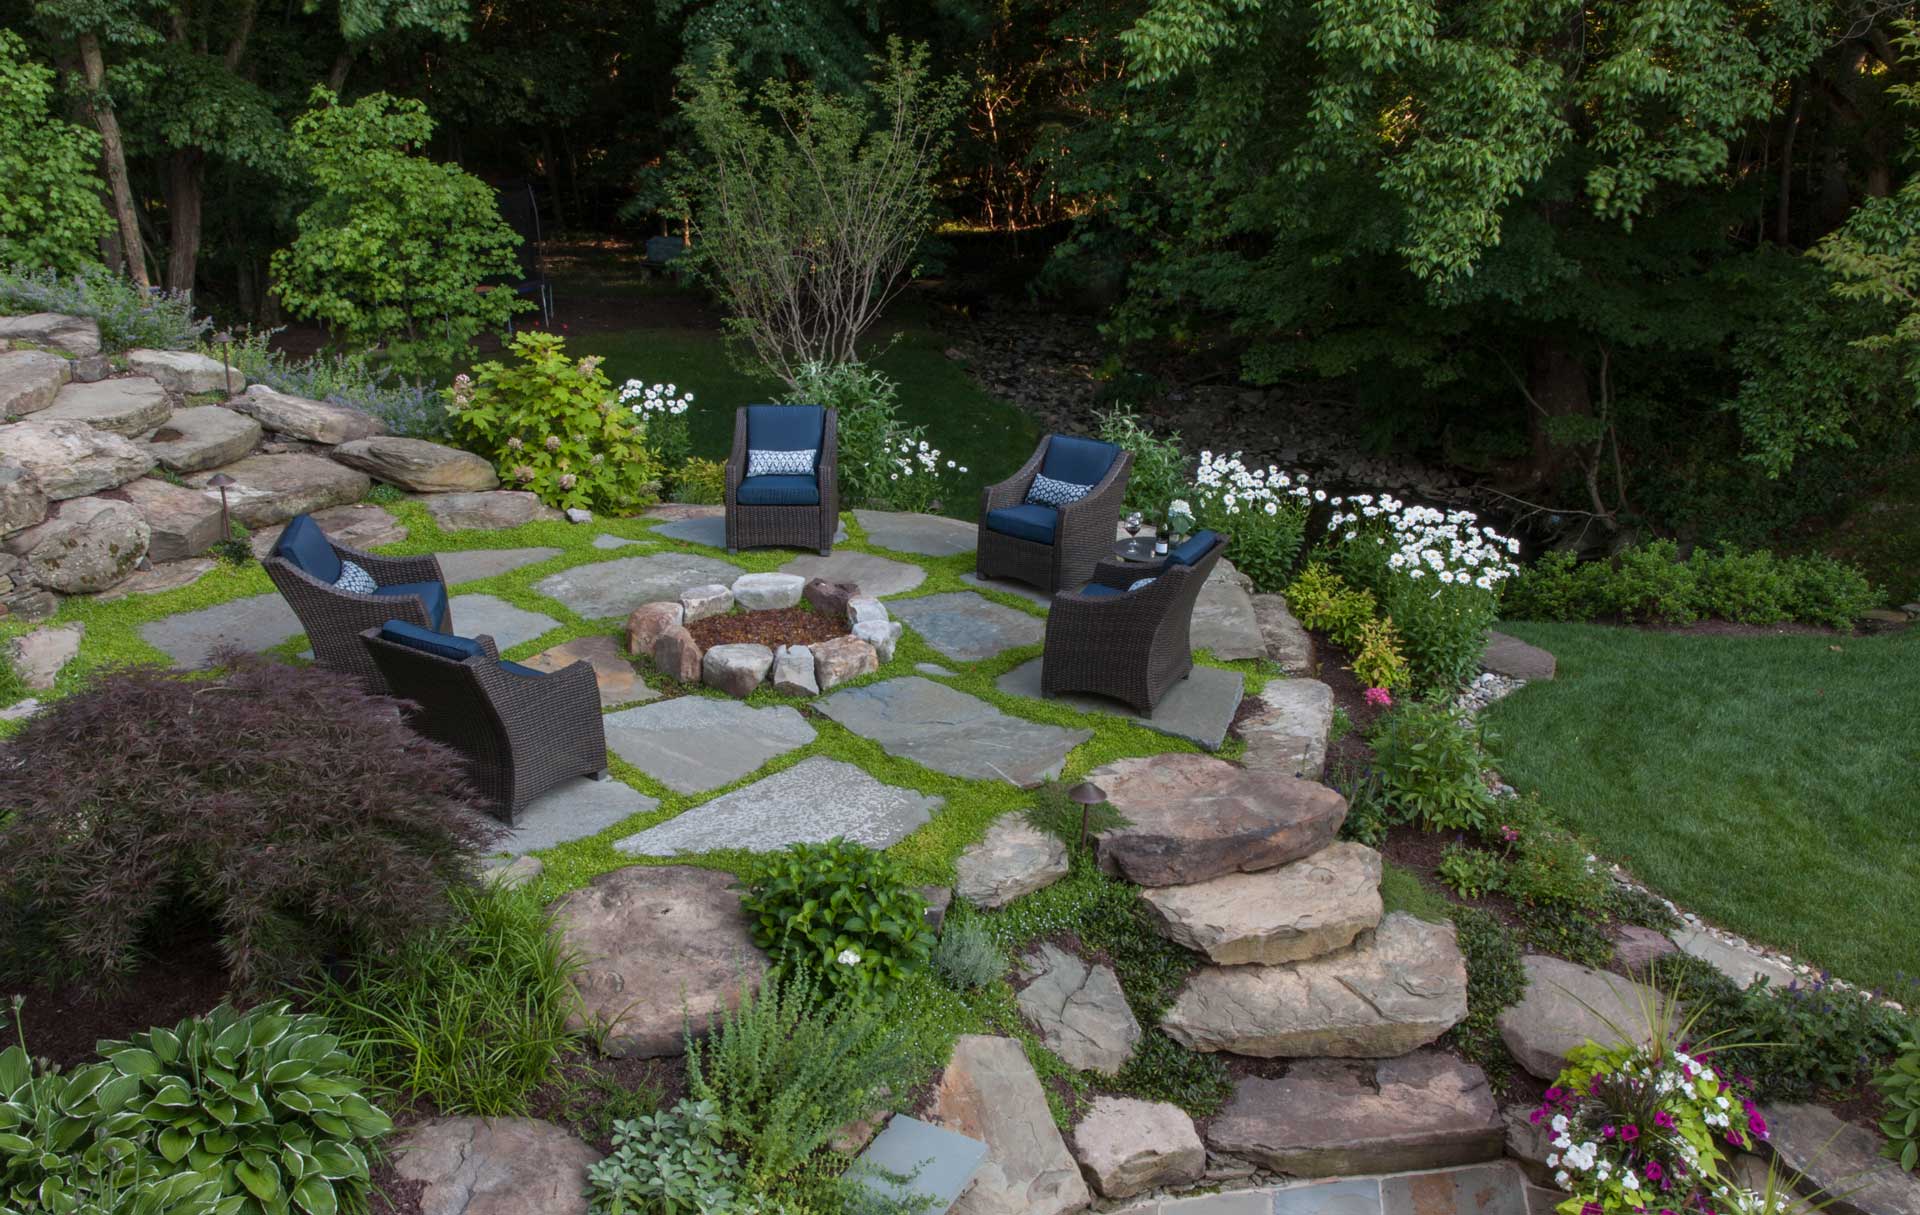 A backyard adorned with stone steps, a fire pit, and seating area, providing a tranquil setting for outdoor enjoyment.